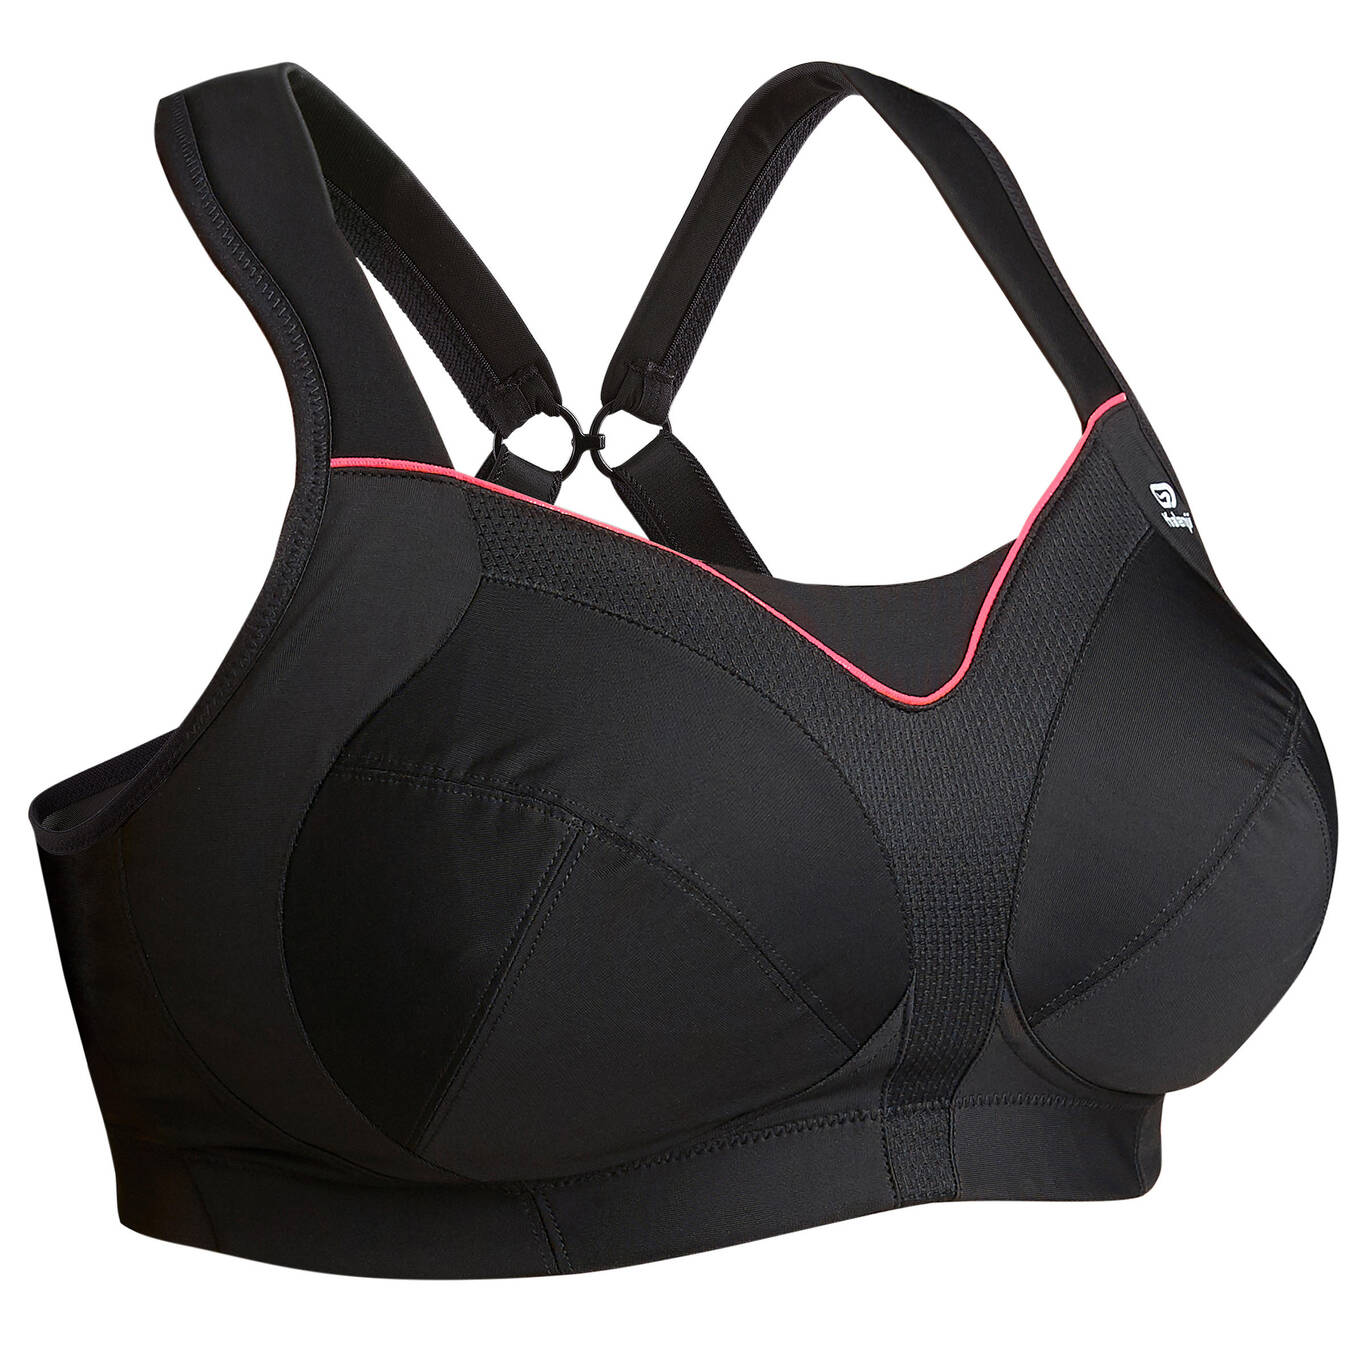 
RUNNING BRA
LARGE SIZE
BLACK WITH PINK CORAL DETAIL